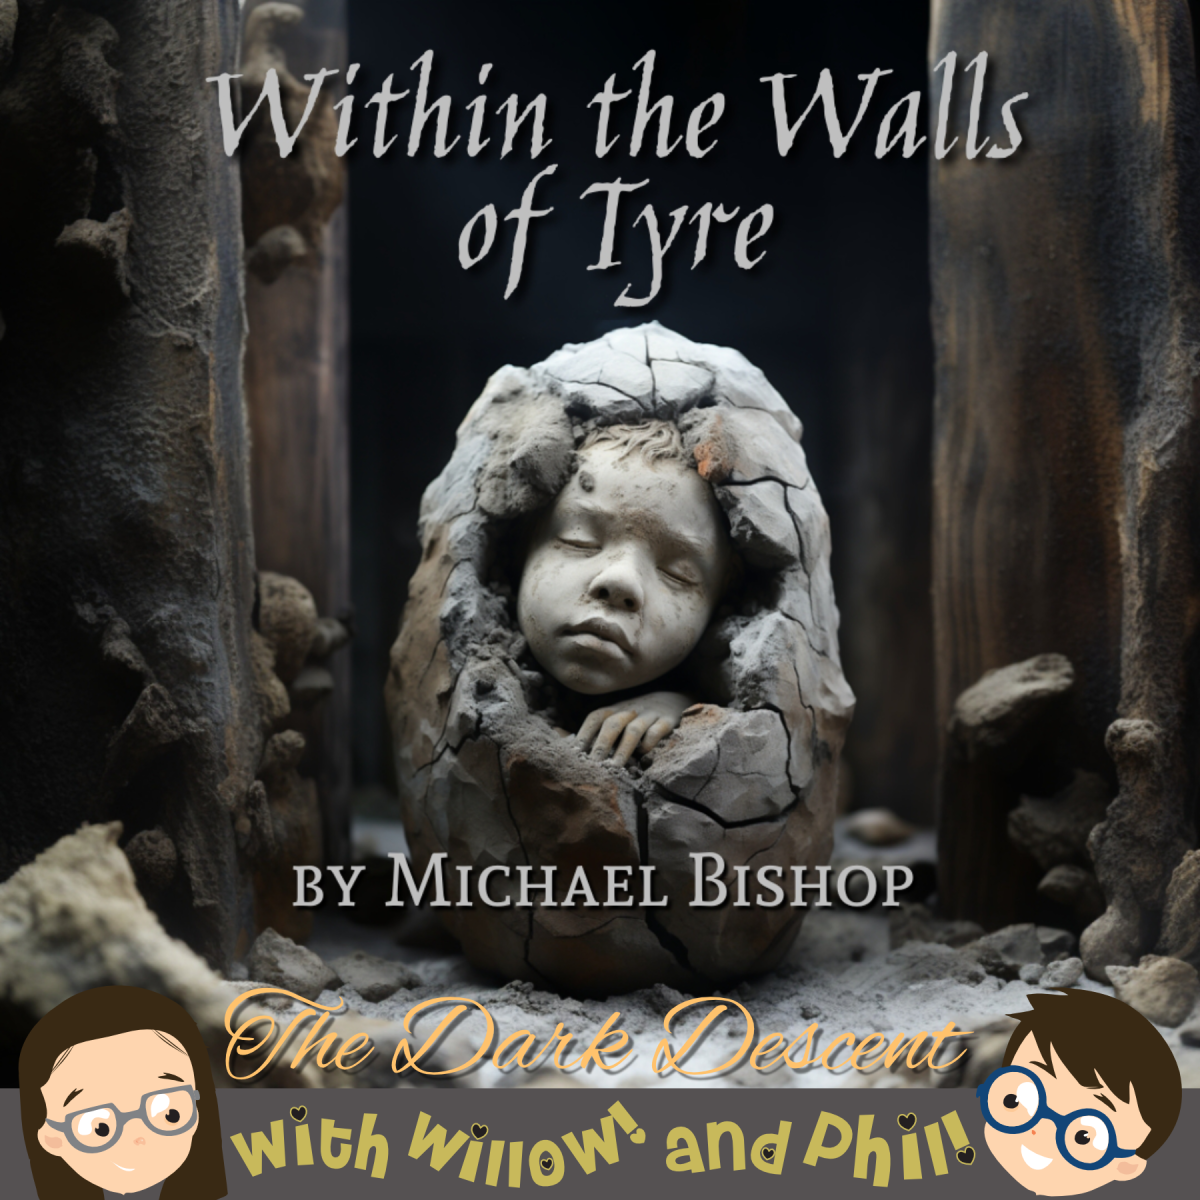 The Dark Descent – “Within the Walls of Tyre” by Michael Bishop